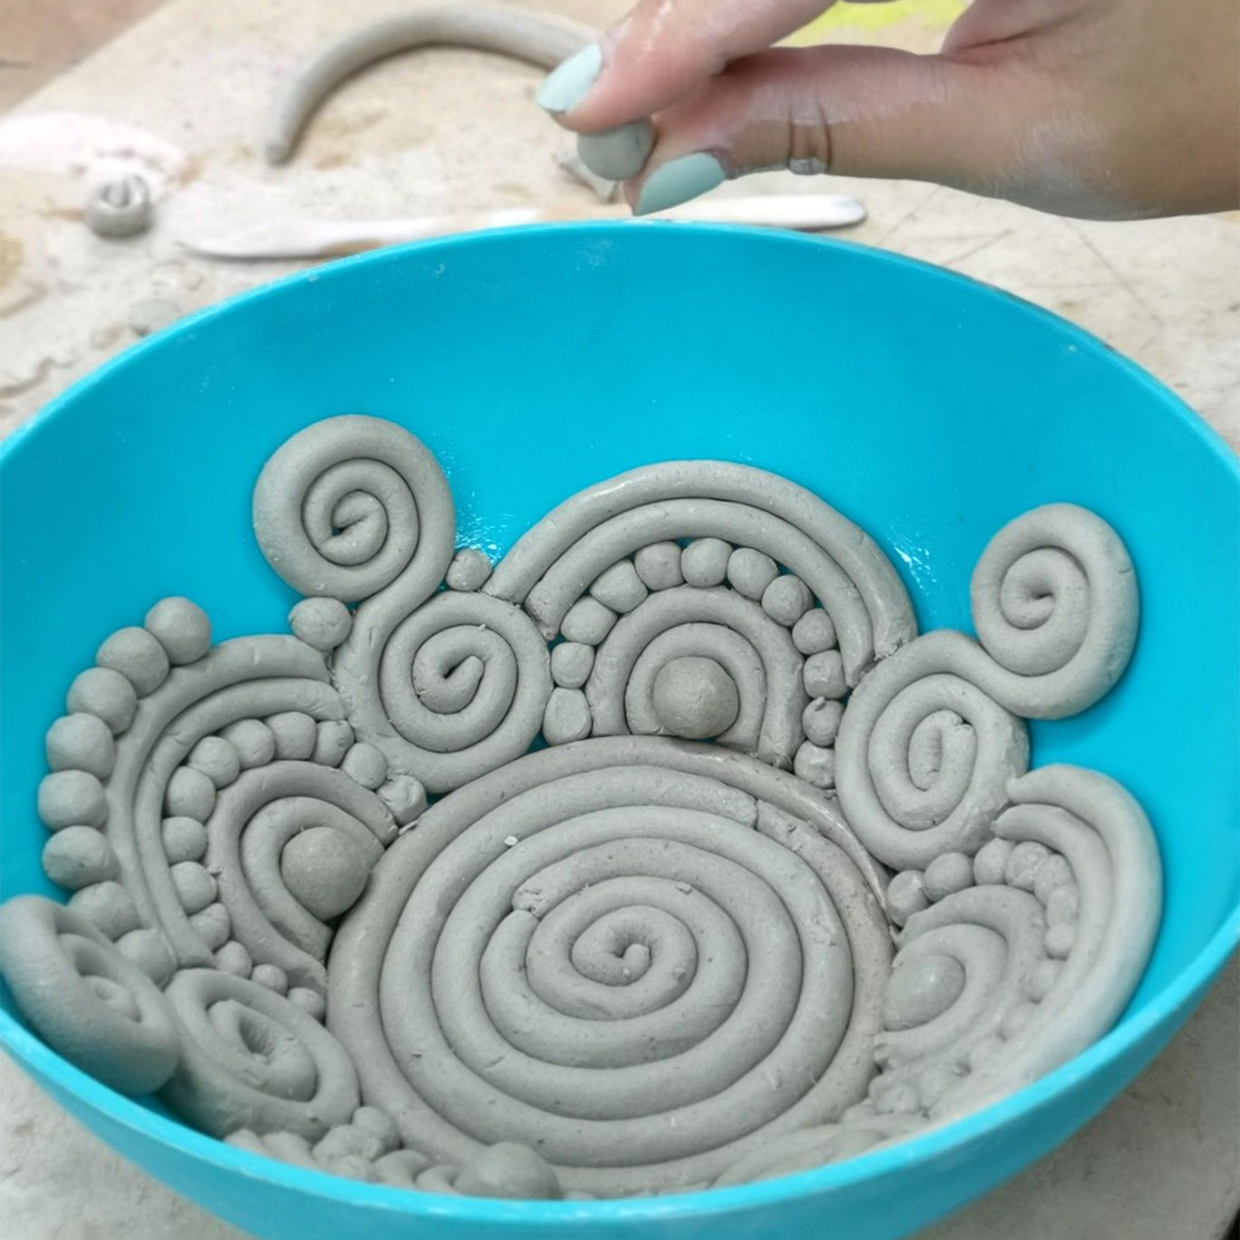 Coil pottery with a mould designs